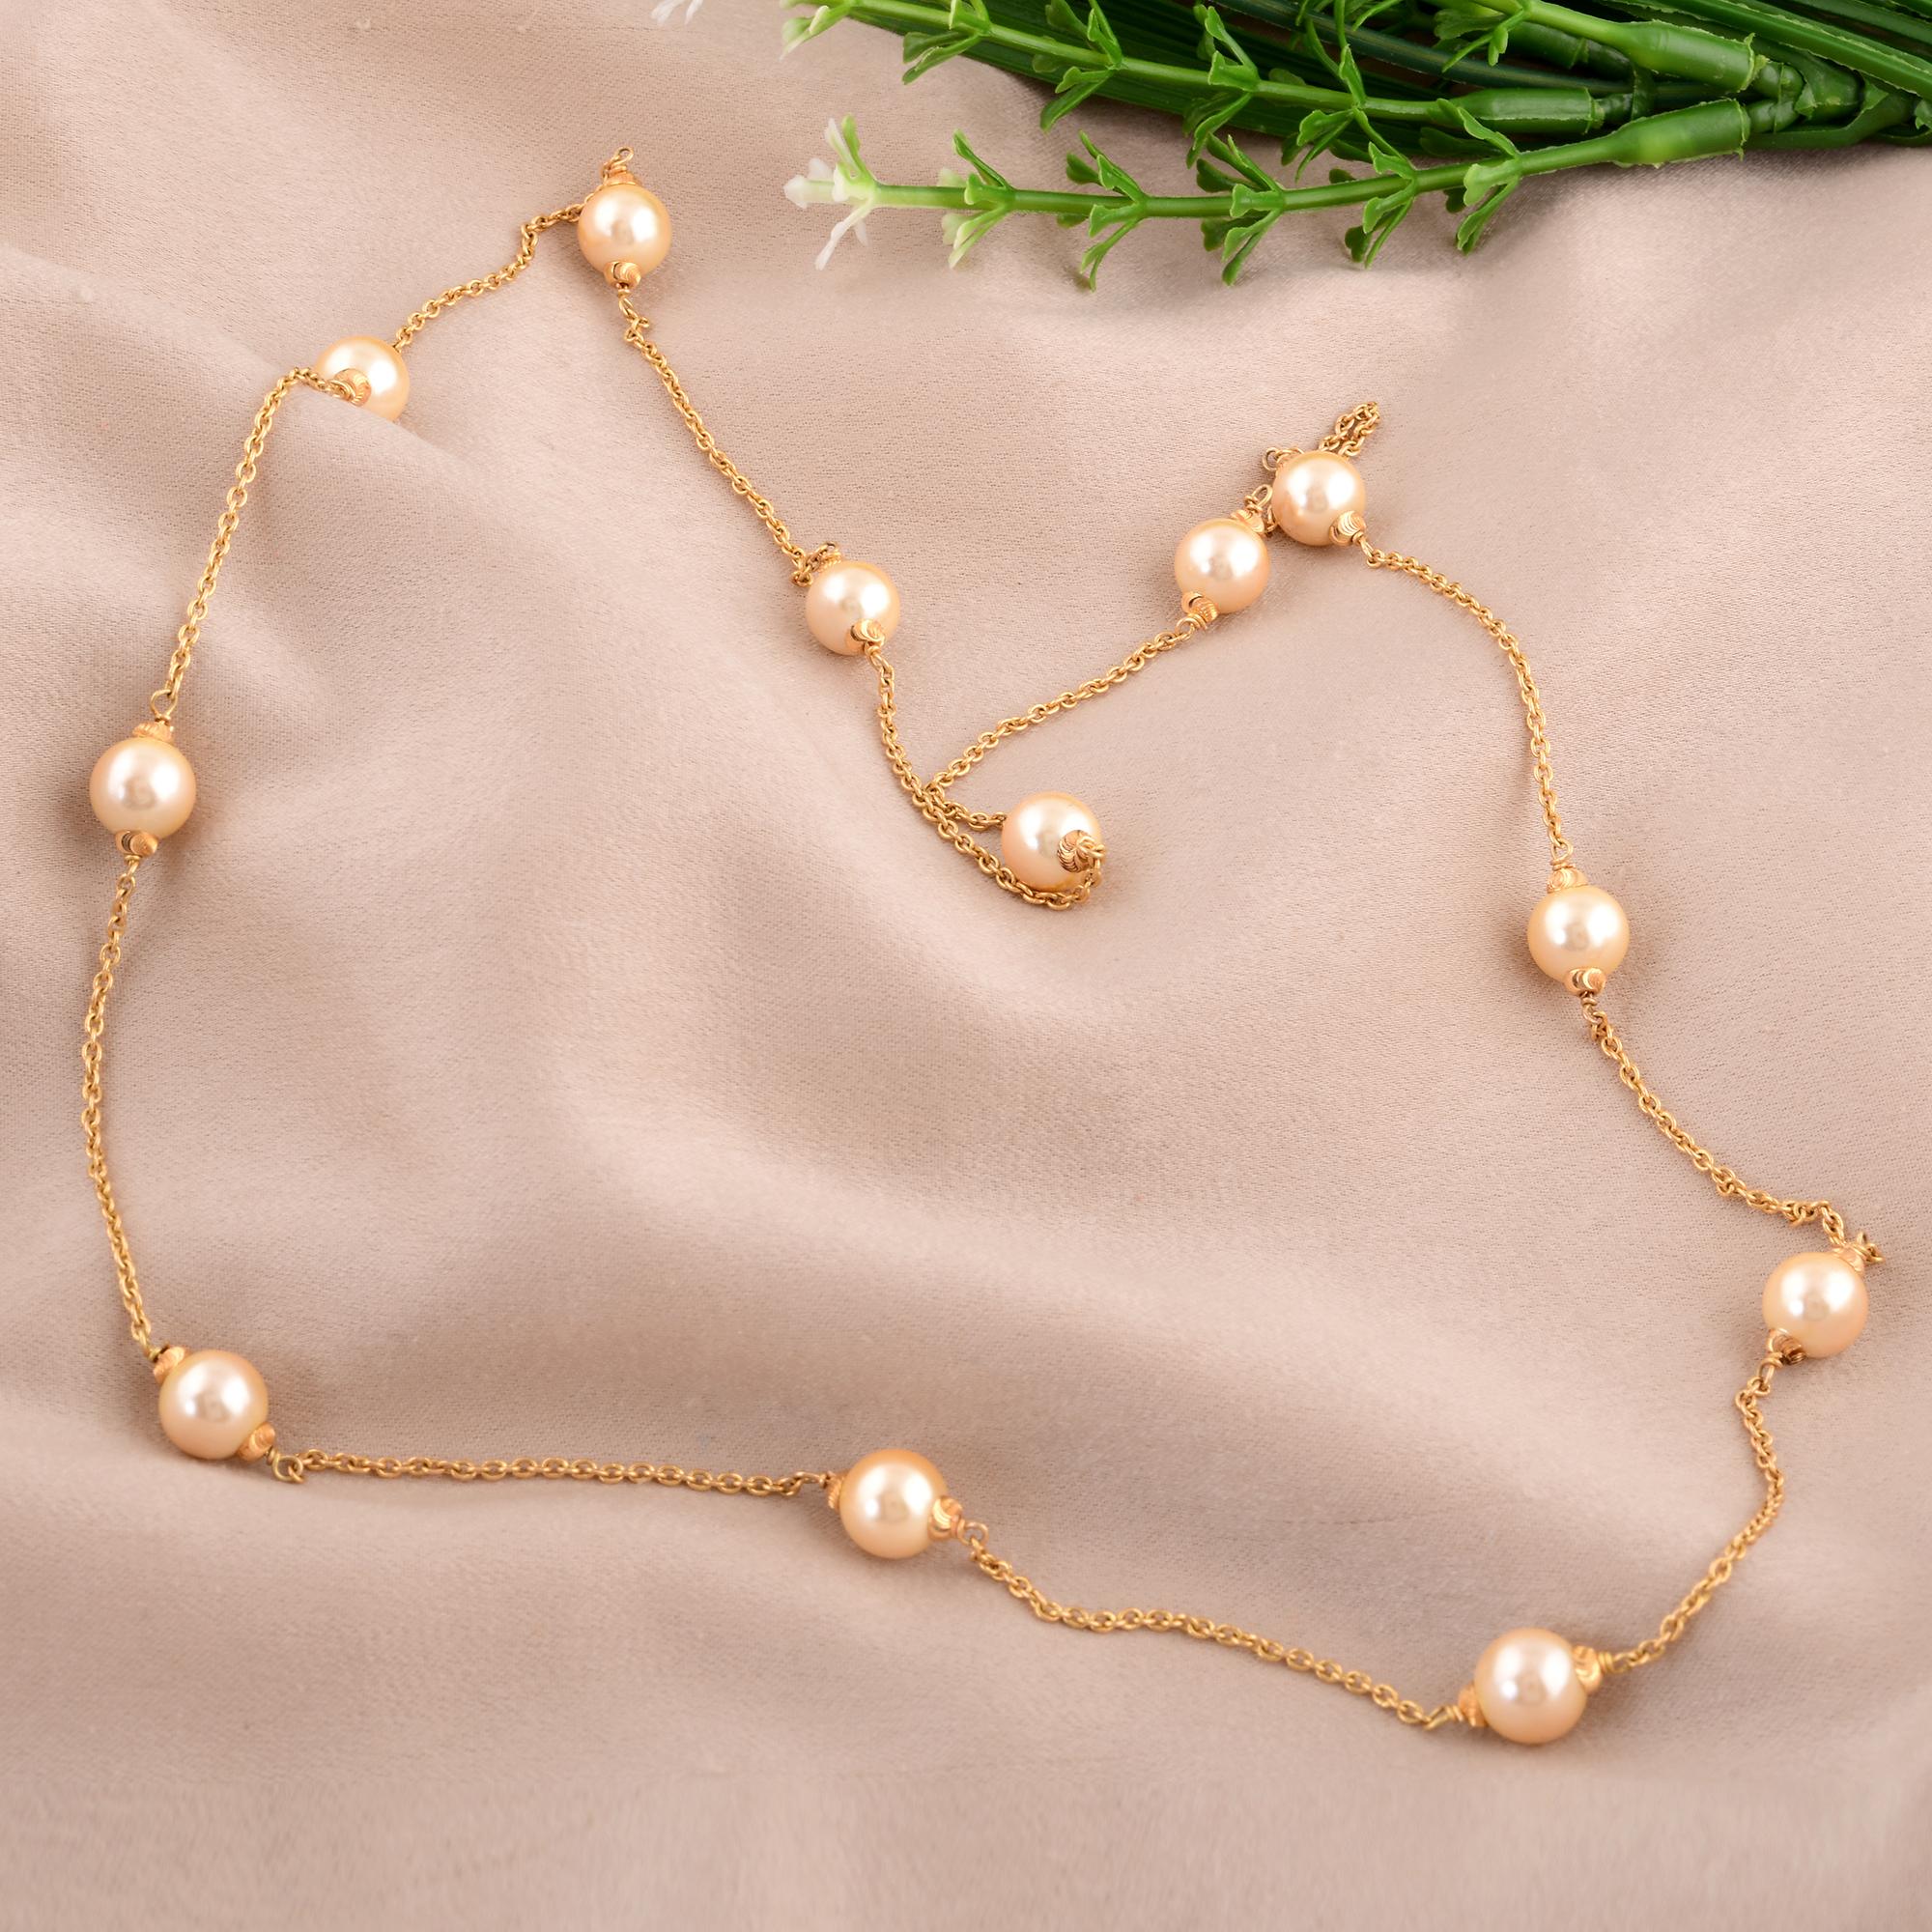 Modern 28 Carat Natural Pearl Beaded Gemstone Necklace 18 Karat Yellow Gold Jewelry For Sale